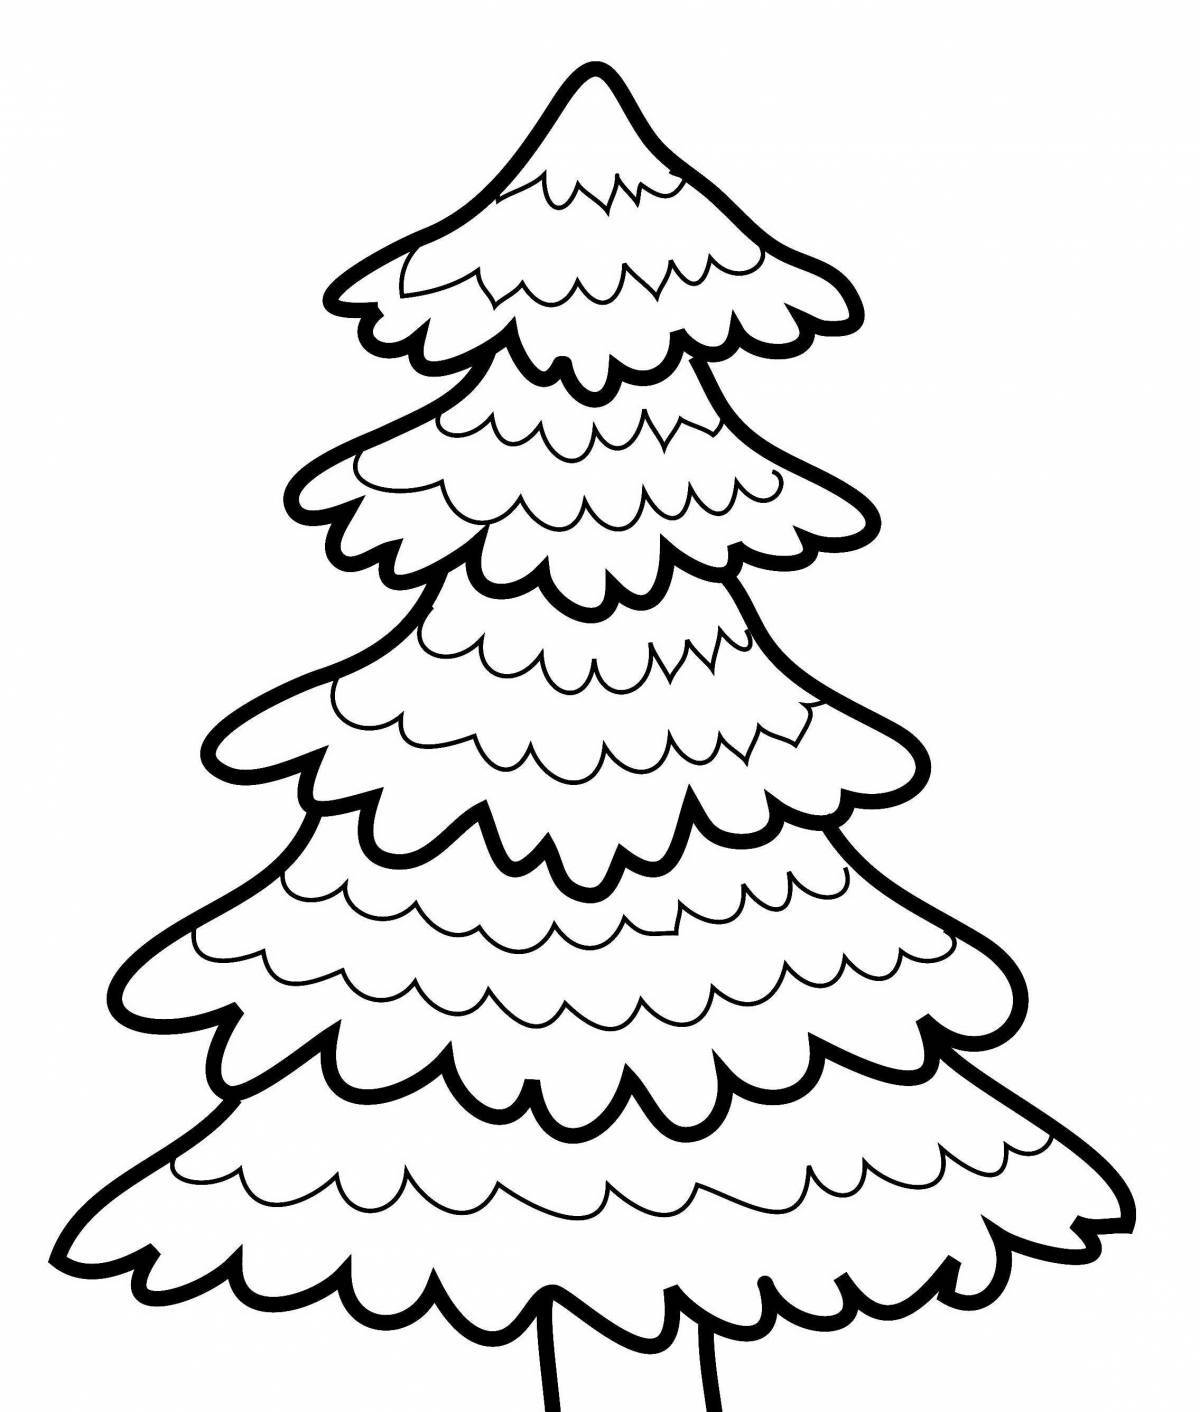 Luminous Christmas tree coloring book for 3-4 year olds